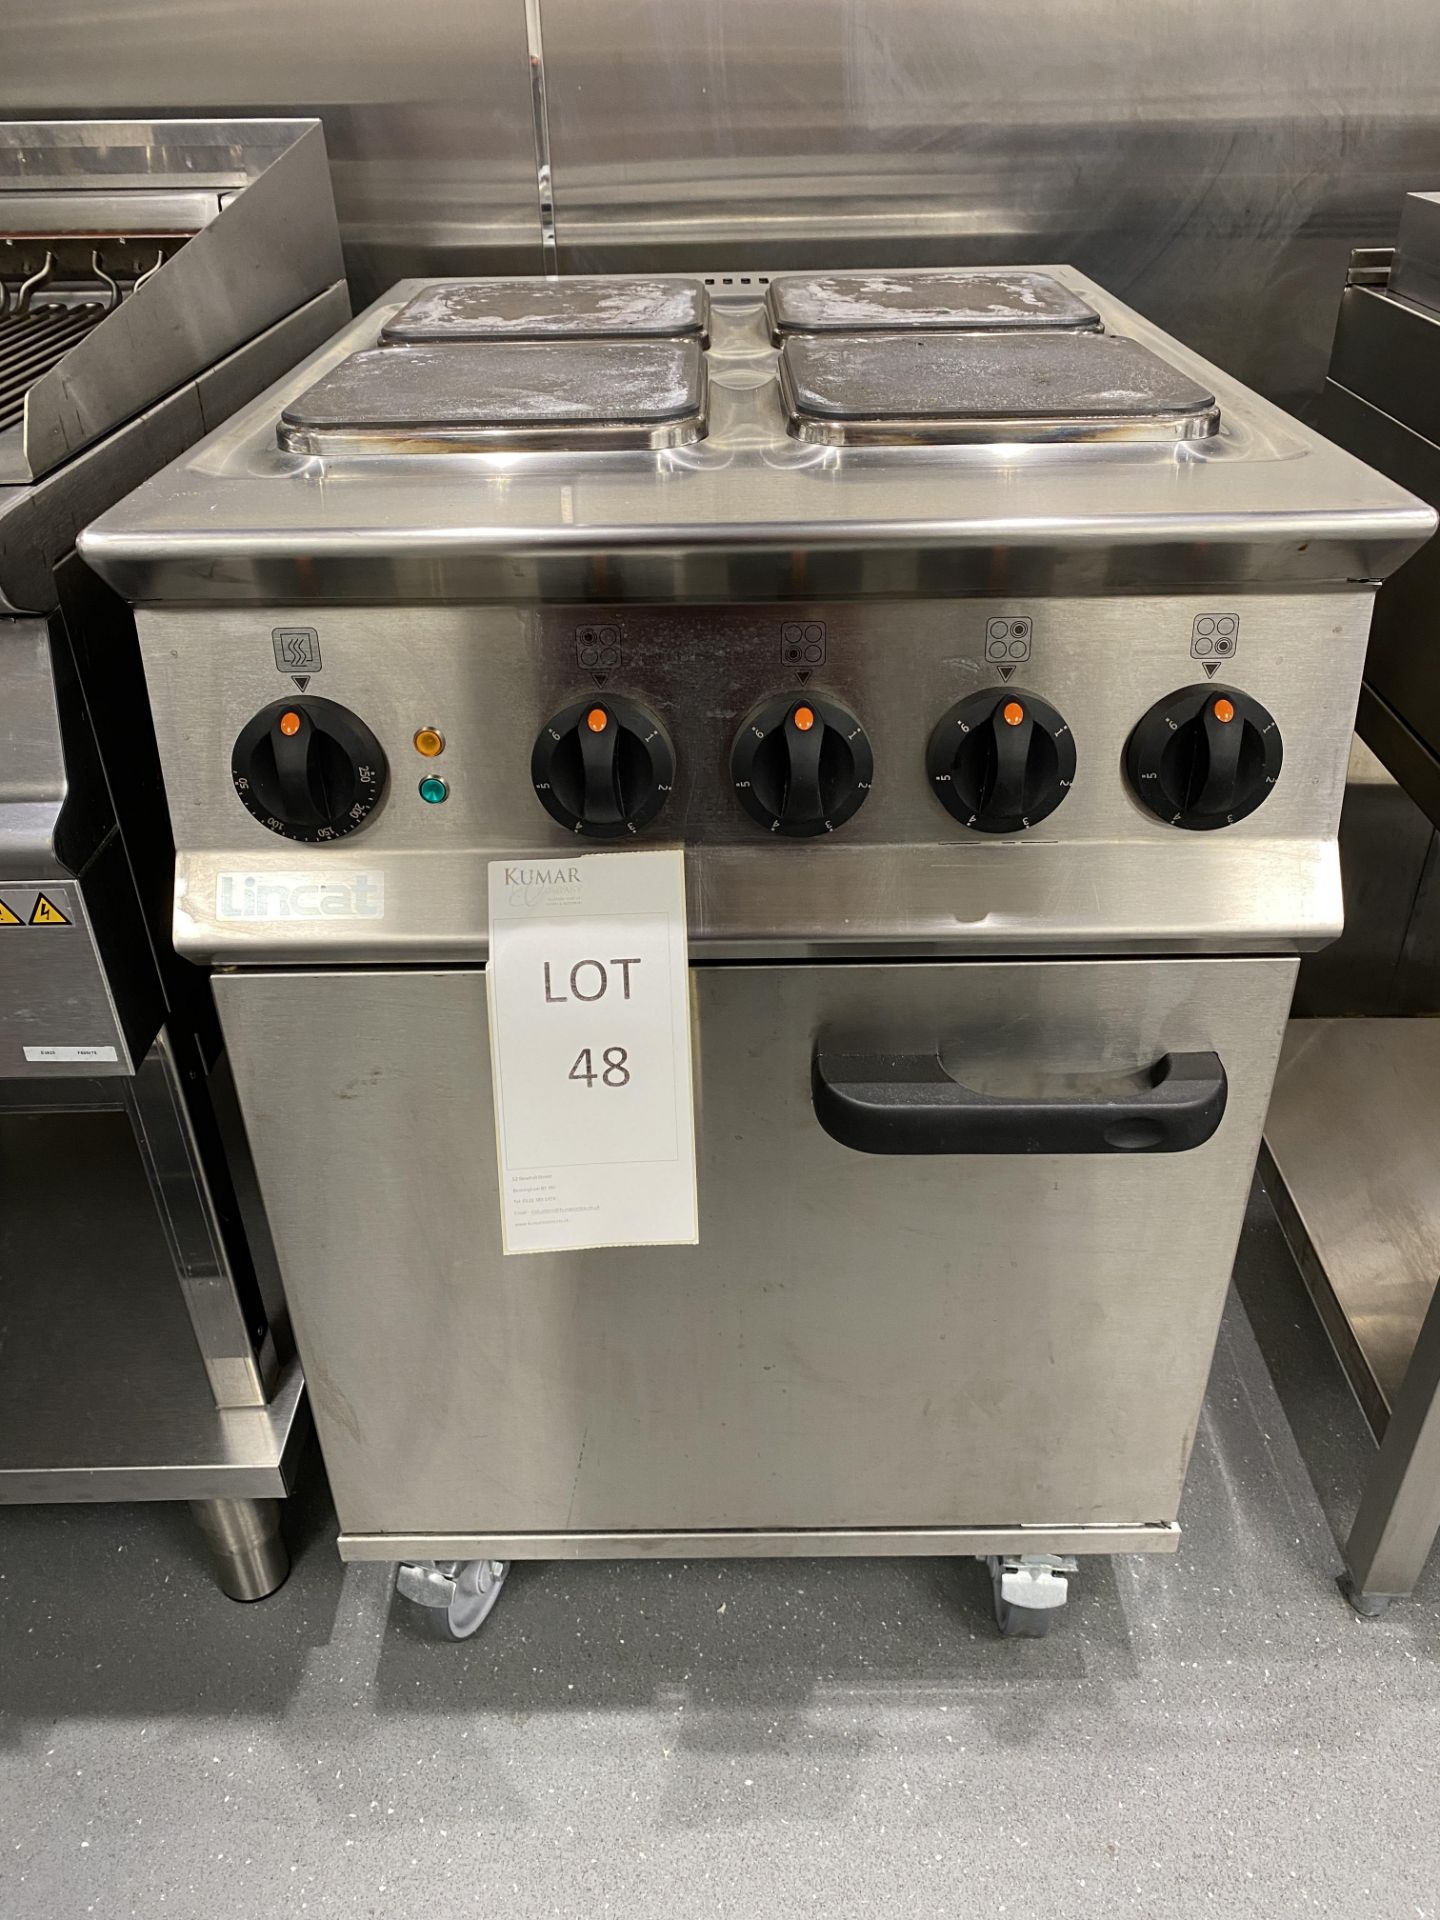 Lincat Opus OE8010, 800 4 Zone Electric Oven Range, Capacity 3 x 1/1GN, Dimensions, H- 925mm x W -